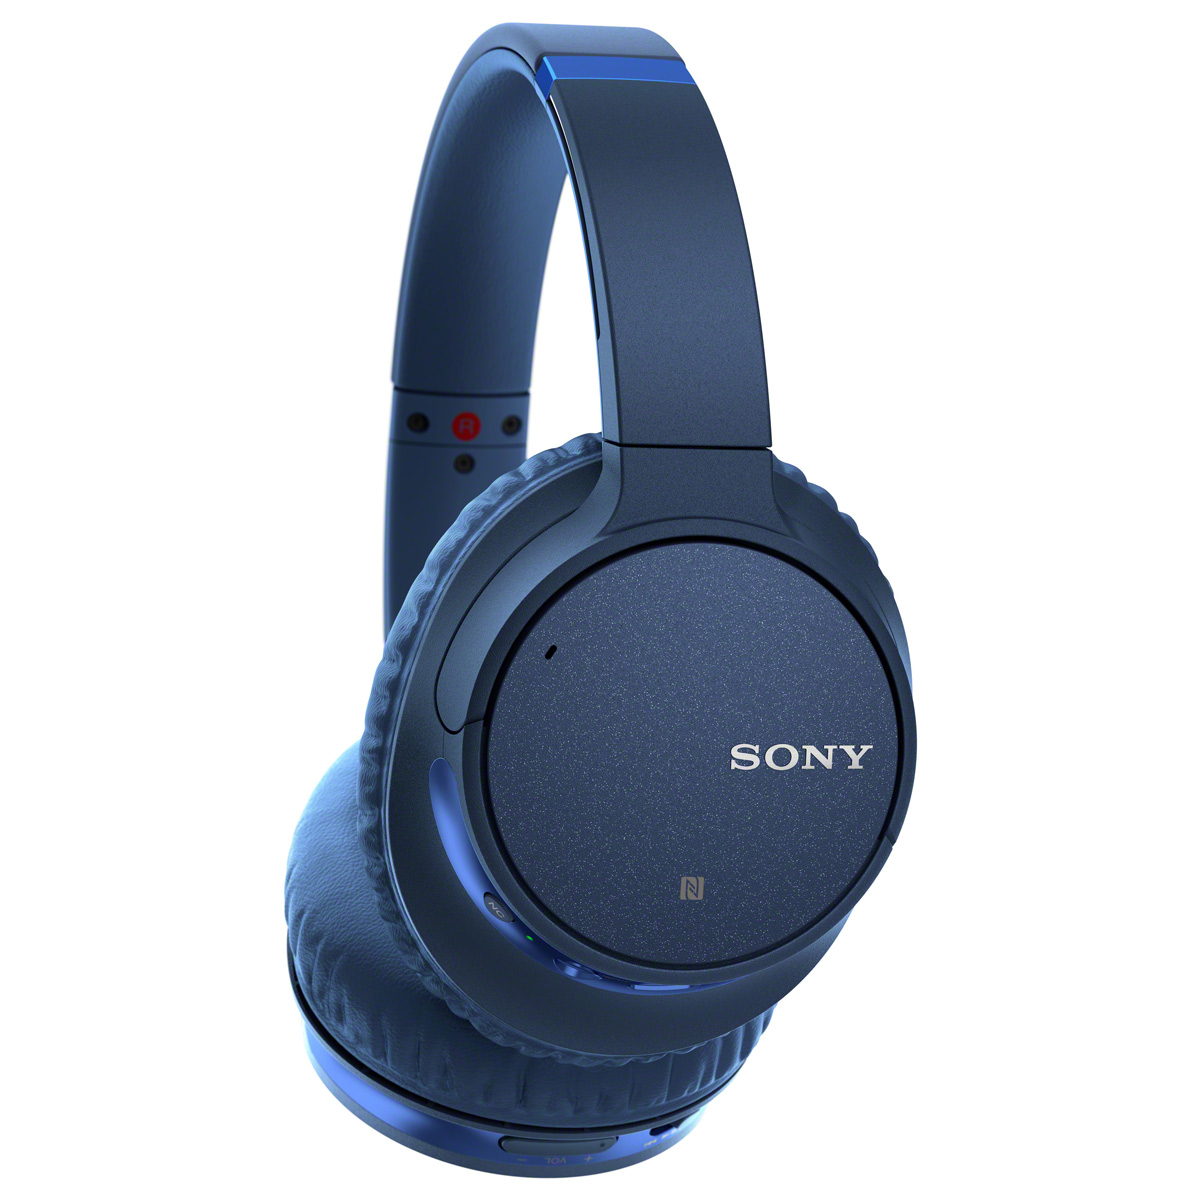 Sony WH-CH700N Wireless Noise-Canceling Over-Ear Headphones (Blue) - image 2 of 4